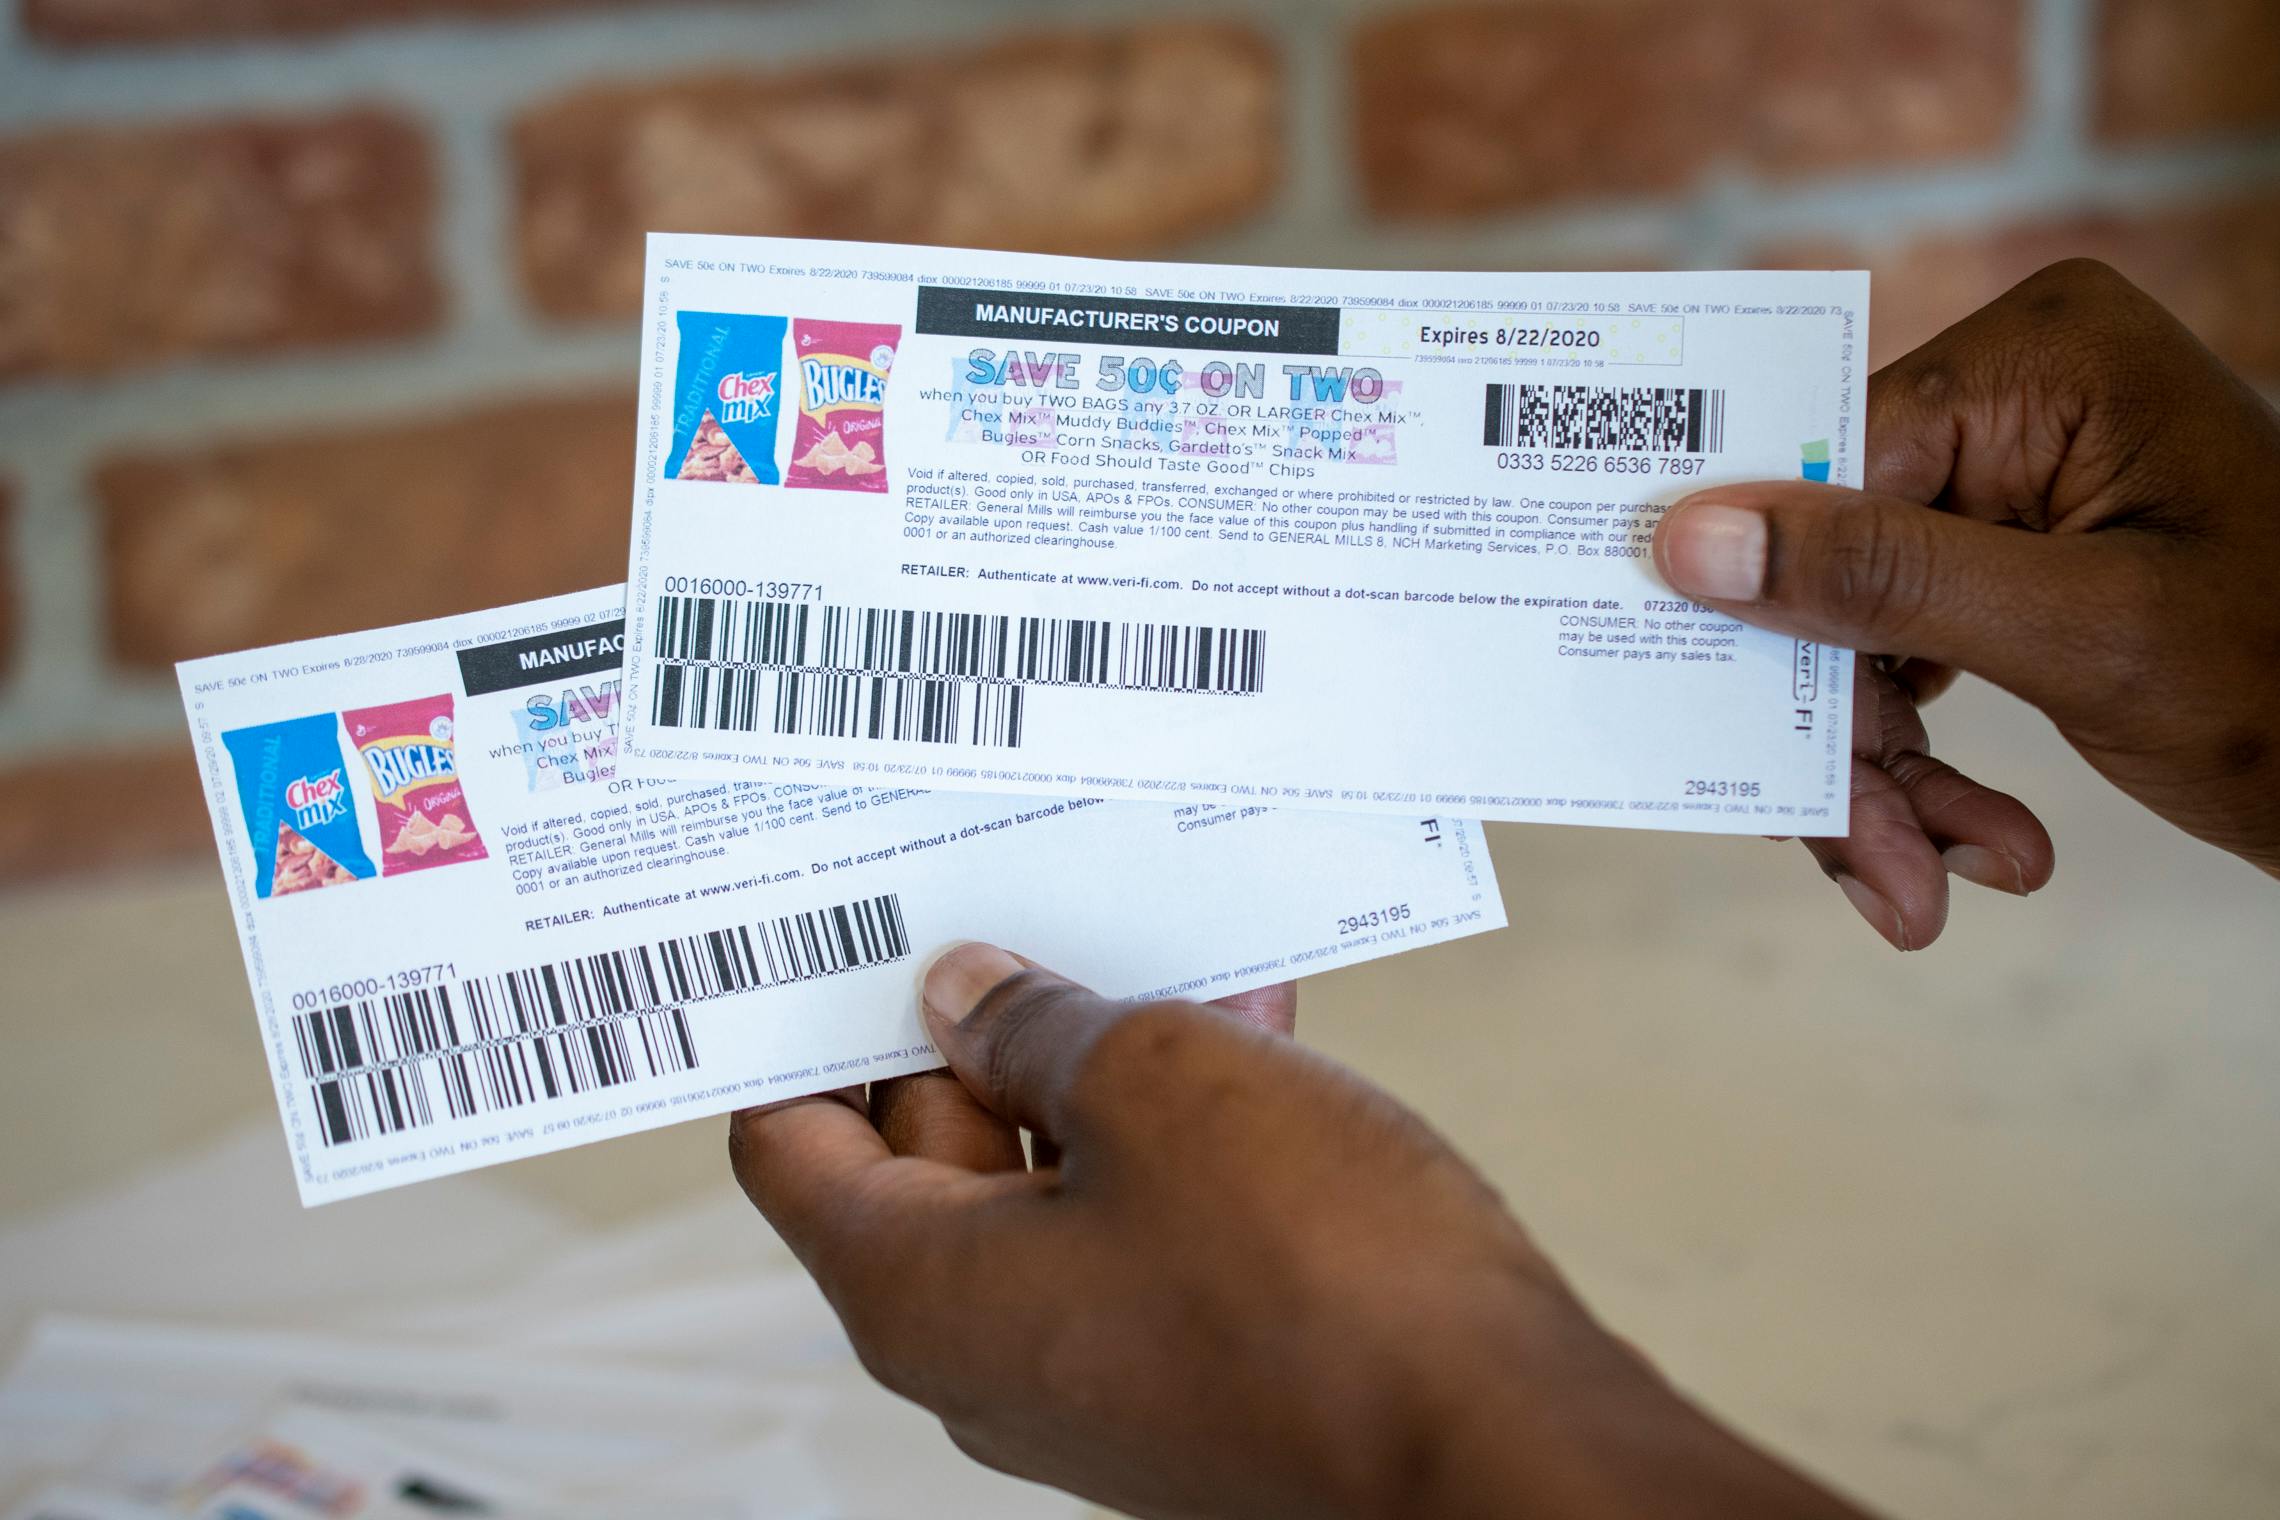 8 Tips To Find And Print All The Internet Coupons You Want The Krazy Coupon Lady